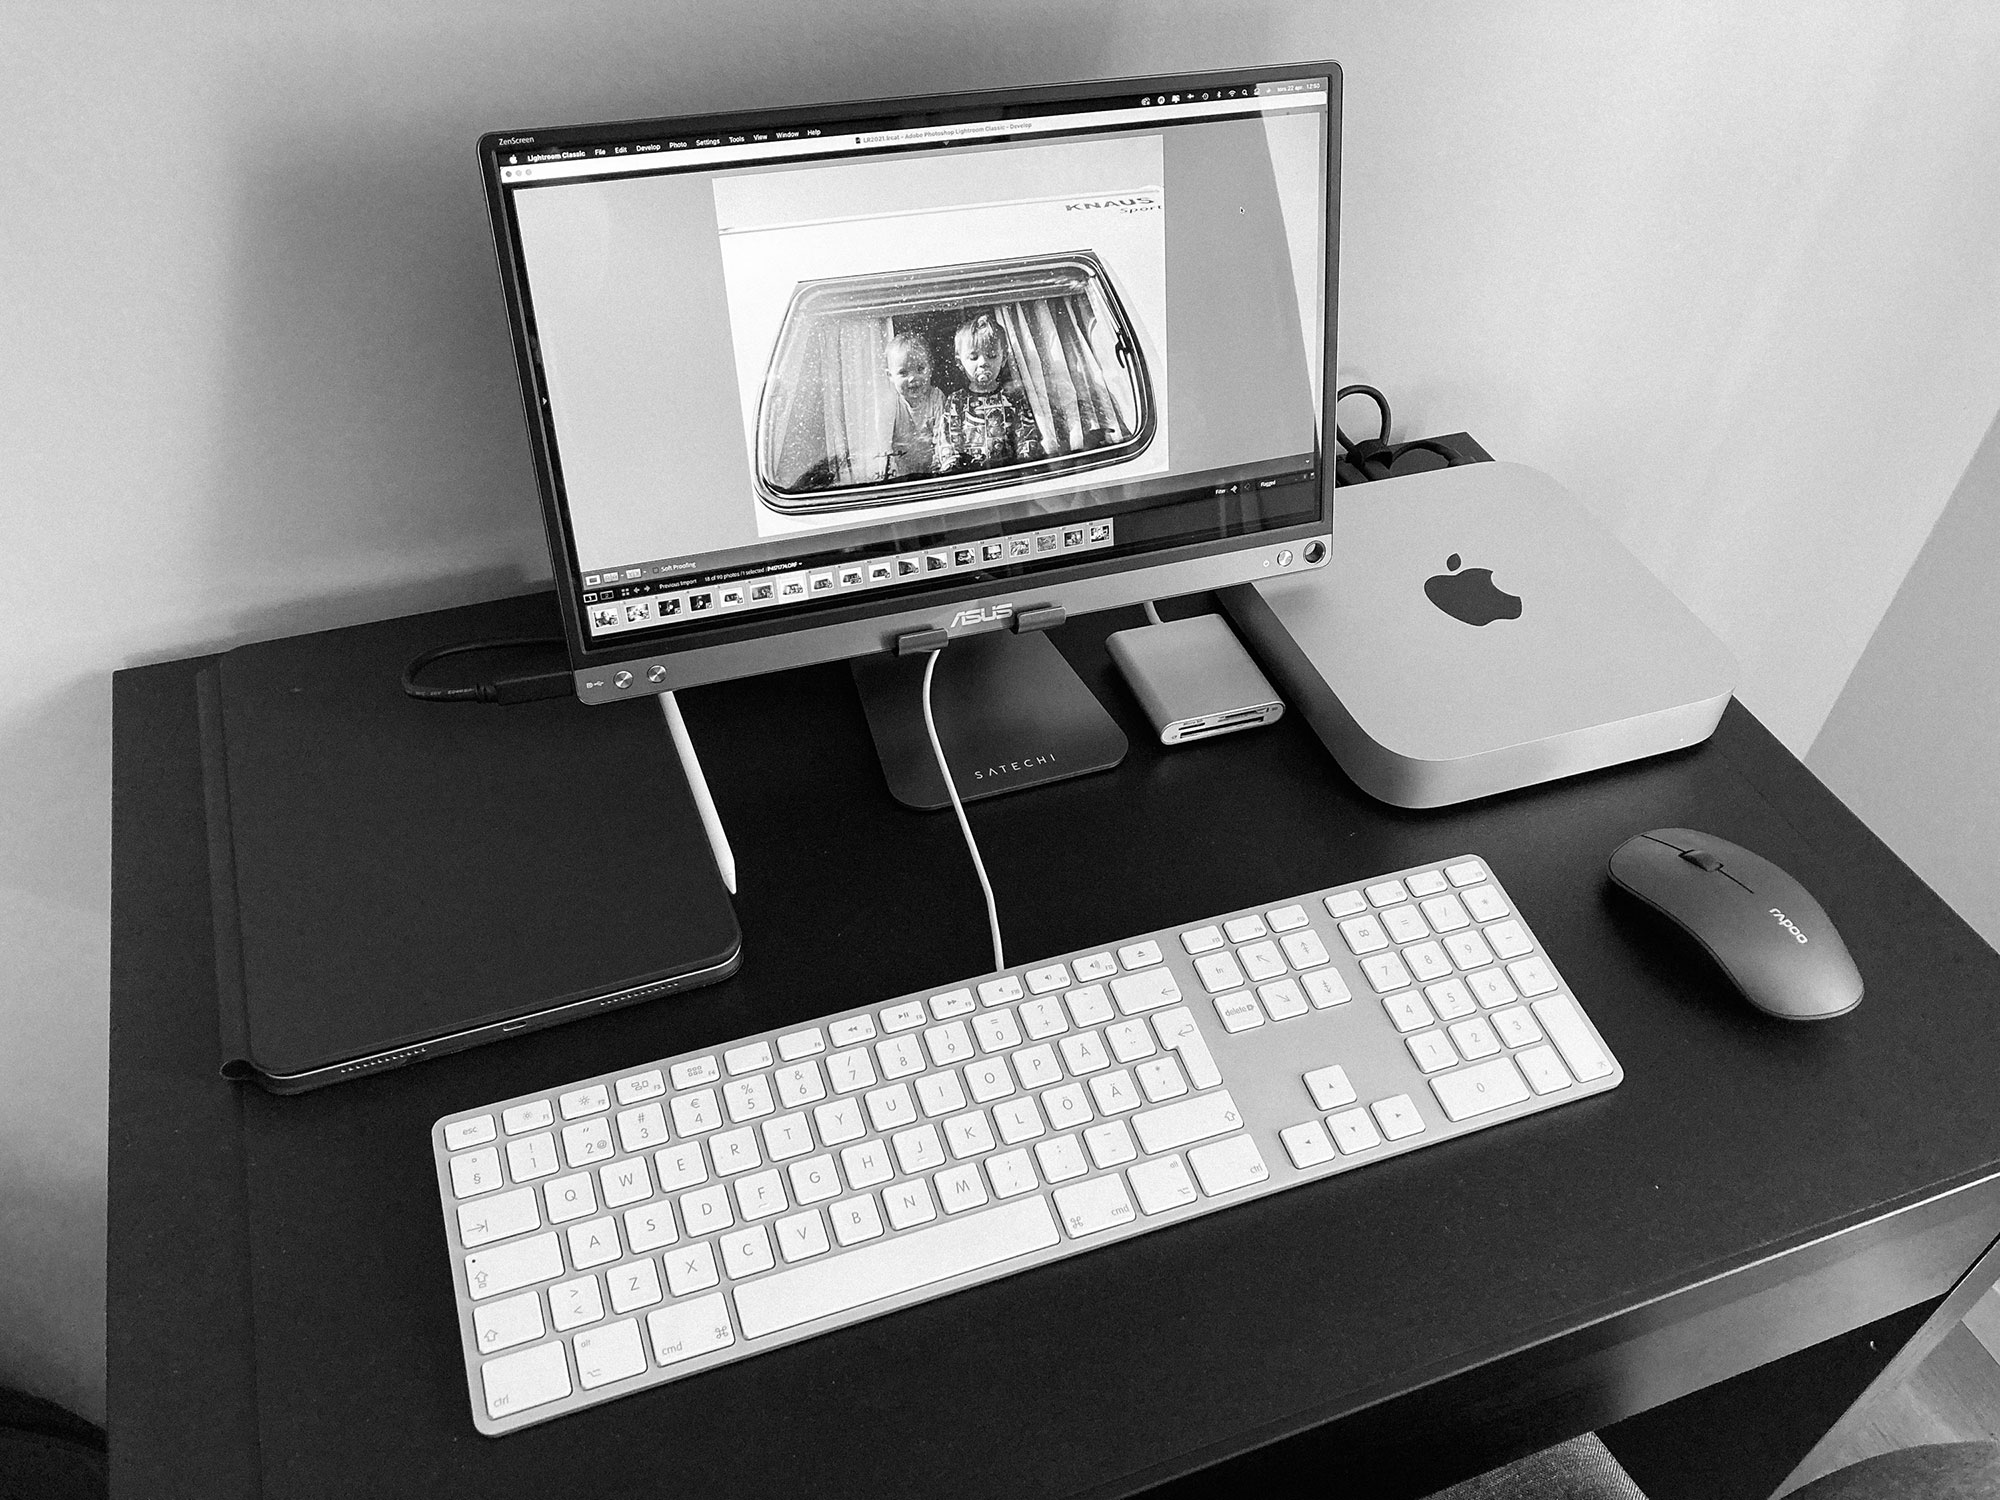 Apple Mac Mini M1 for photographers - A compact but powerful ...